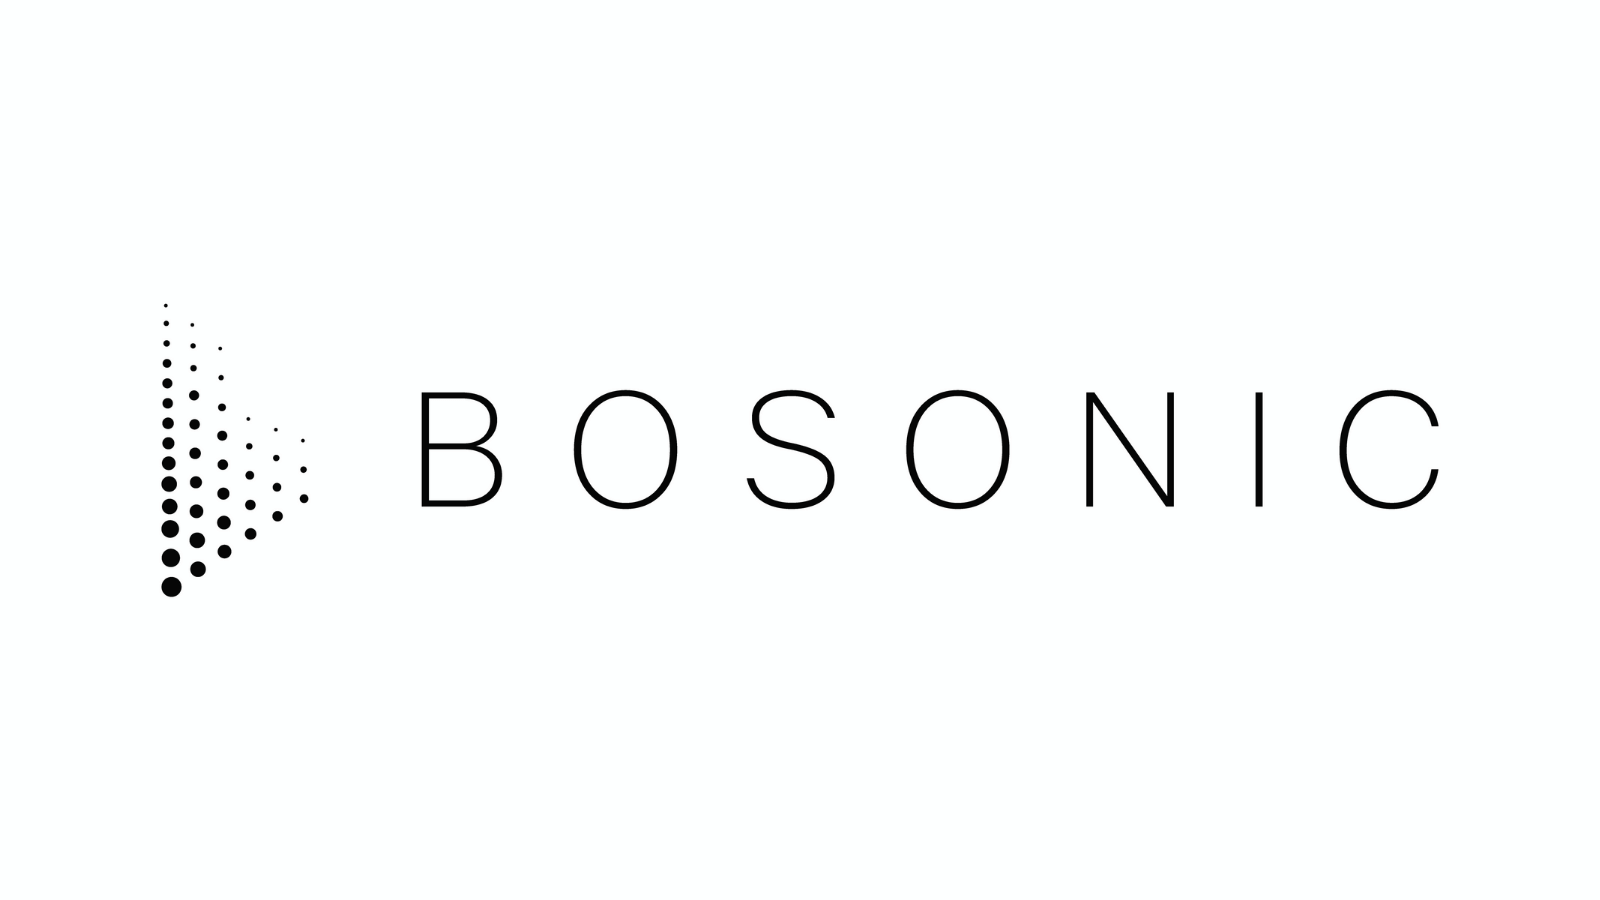 Bosonic Launches Enterprise Solutions For Digital Assets Clearing And Settlement